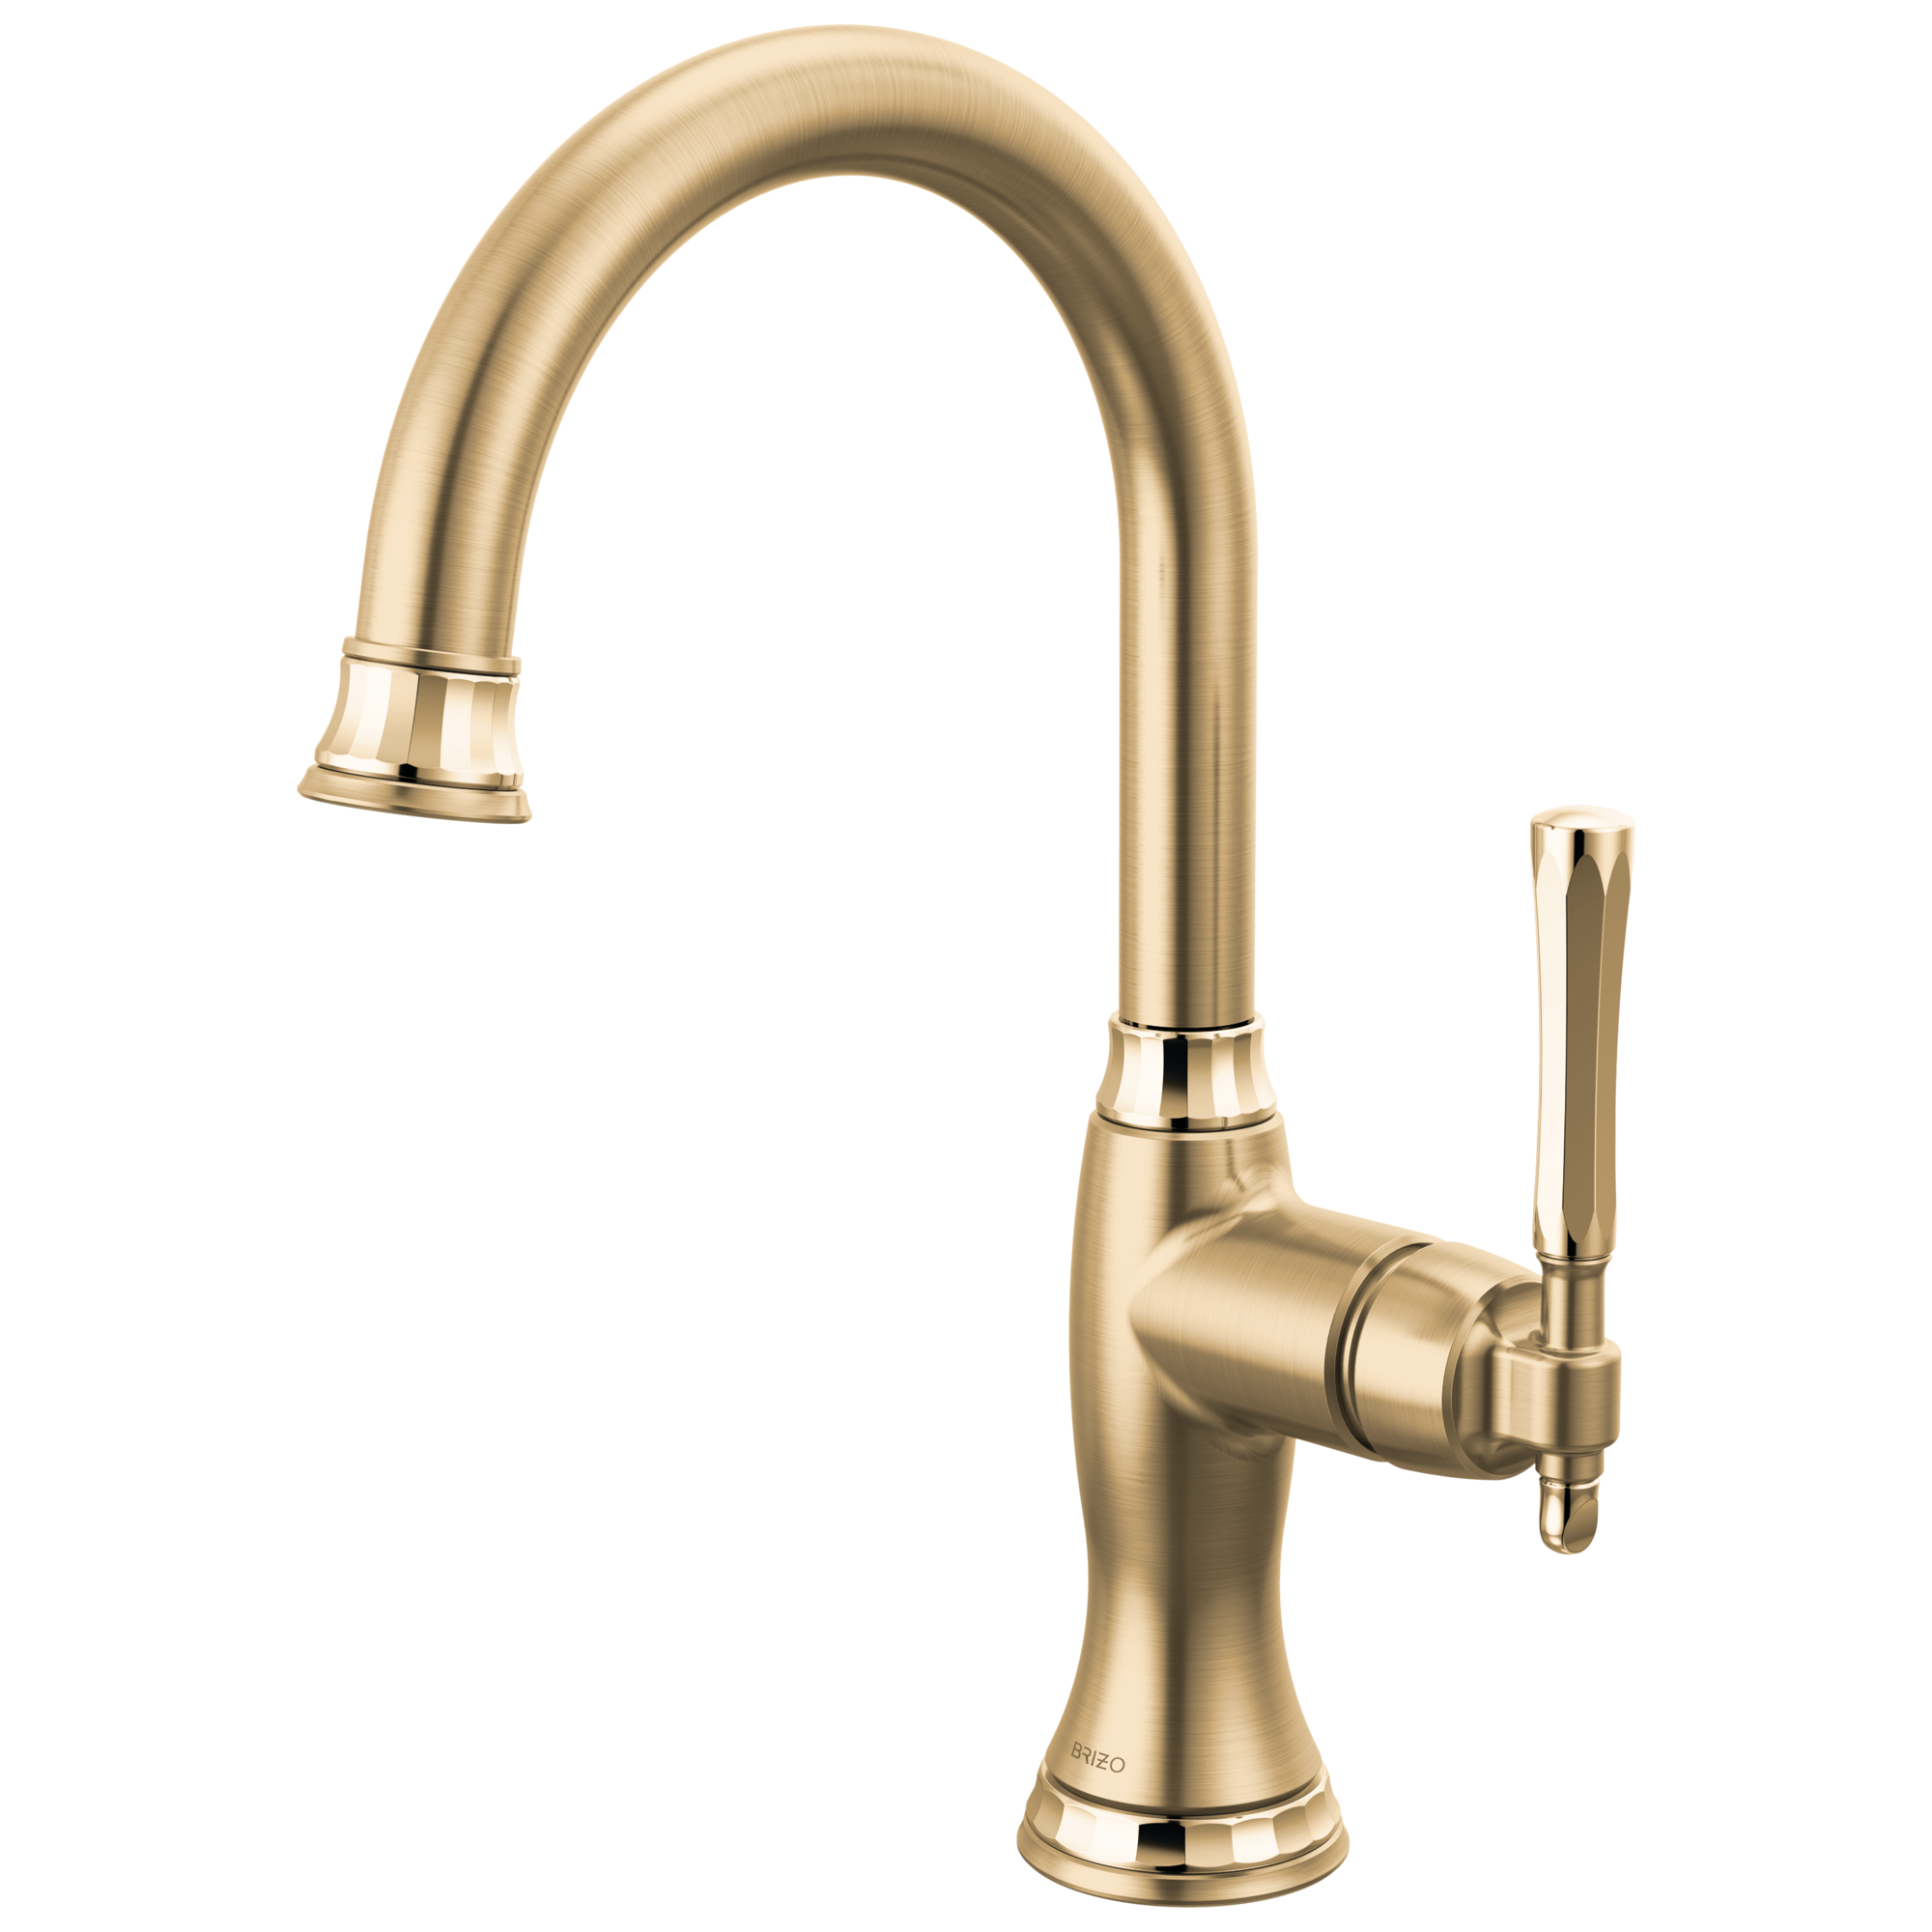 Brizo The Tulham Kitchen Collection by Brizo Bar Faucet